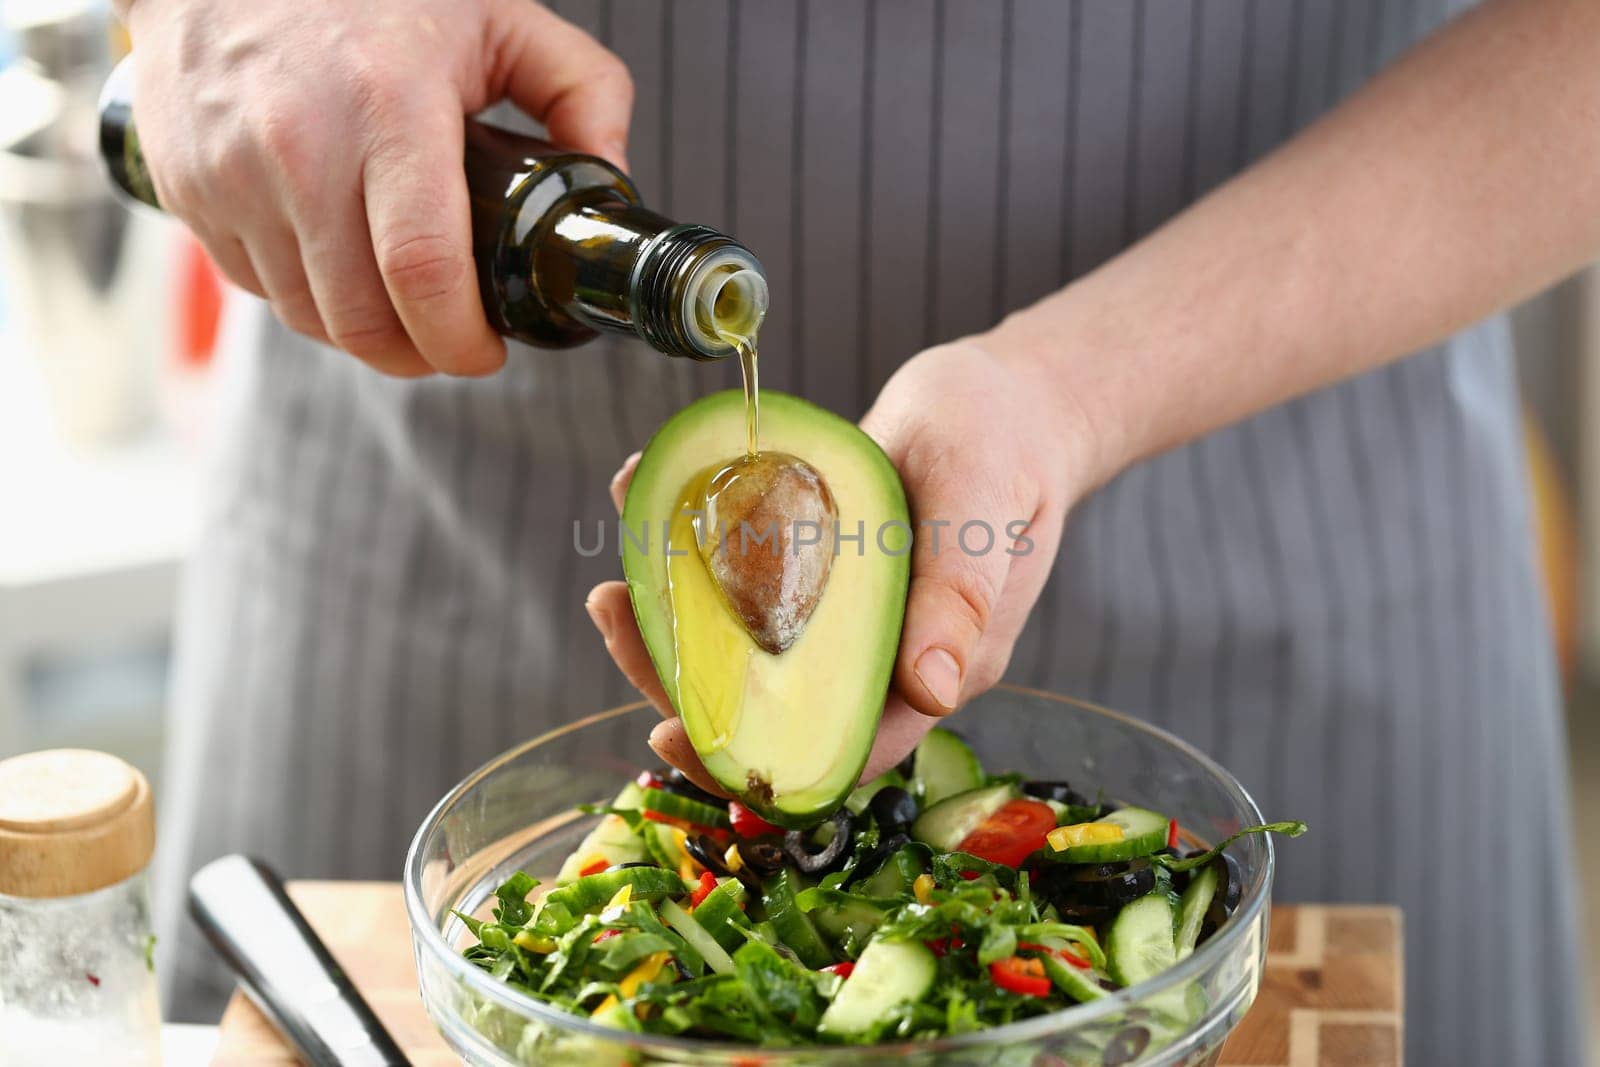 Chef prepares a salad of fresh green vegetables and avocado with butter. Cooking healthy diet or vegetarian food concept